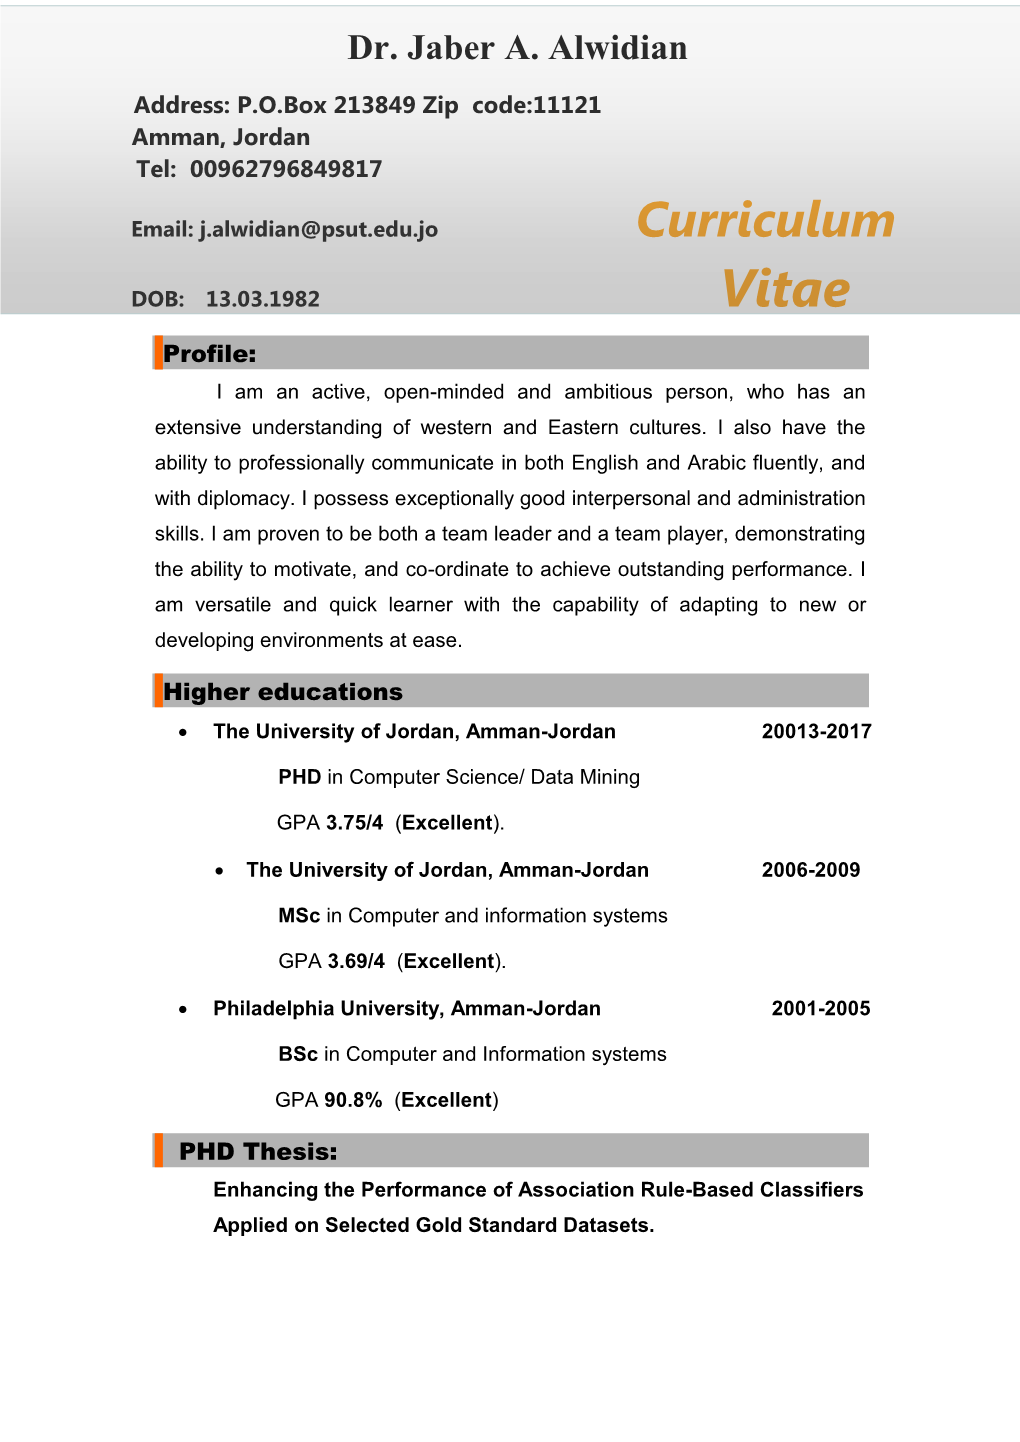 Curriculum DOB: 13.03.1982 Vitae Profile: I Am an Active, Open-Minded and Ambitious Person, Who Has an Extensive Understanding of Western and Eastern Cultures